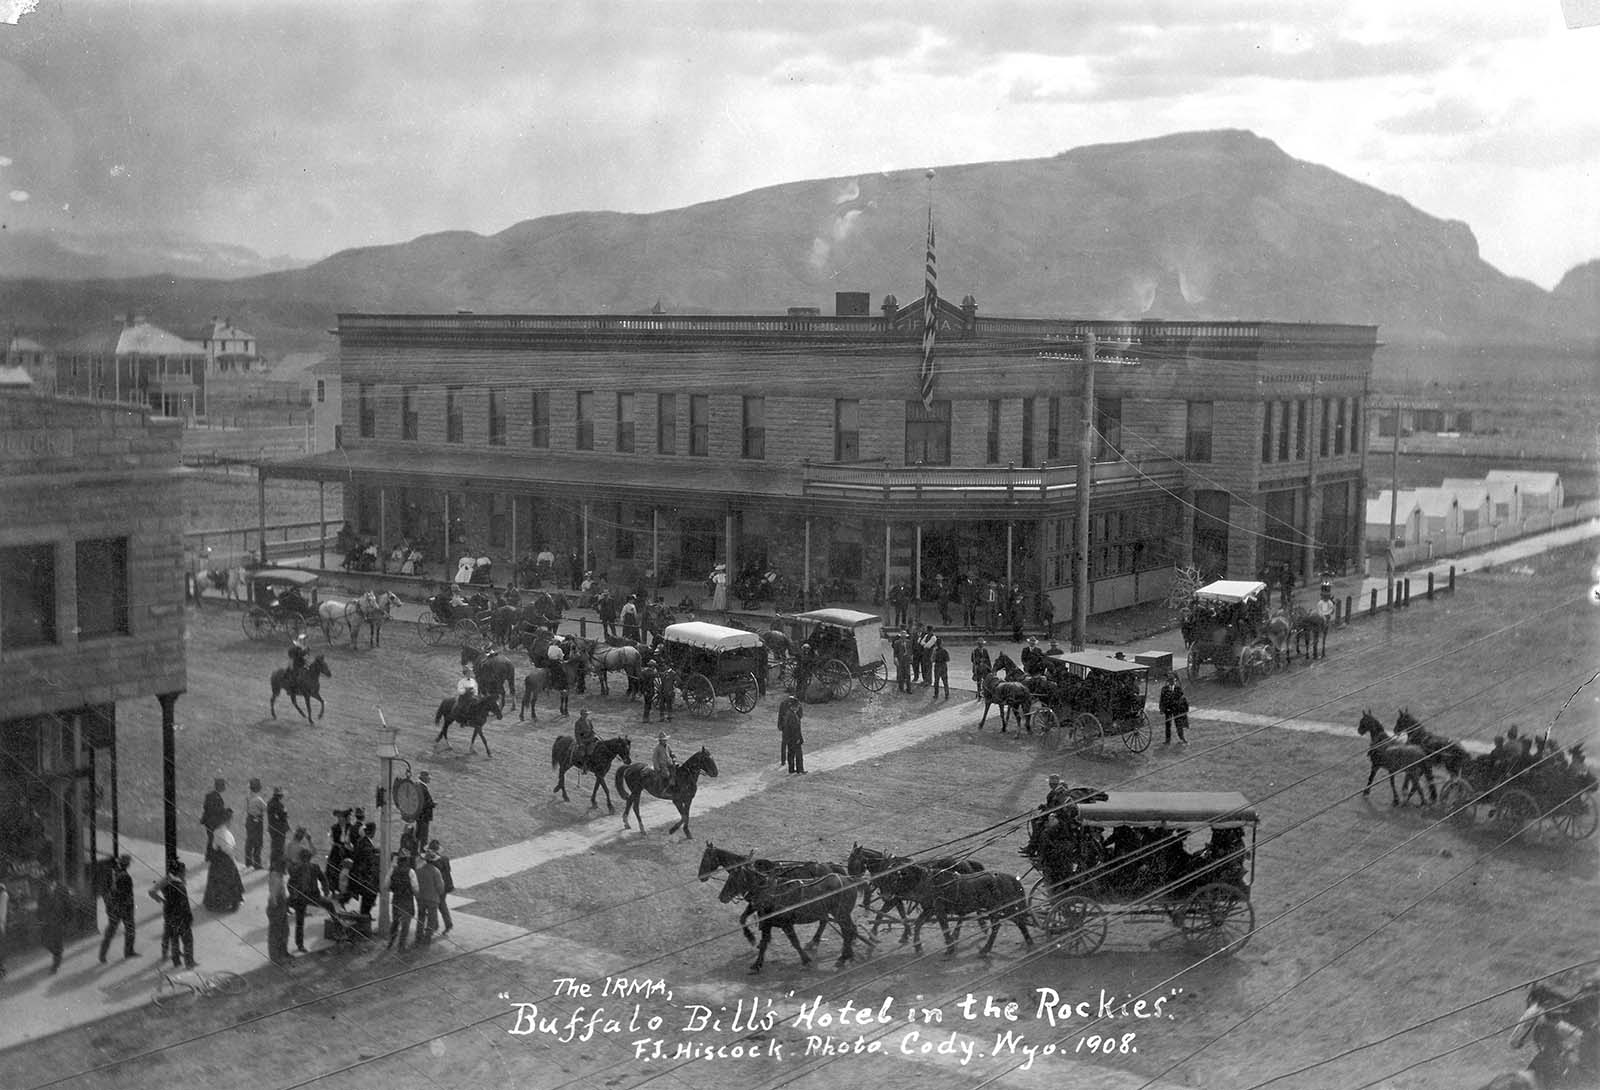 The Irma Hotel in 1908. MS 6 William F. Cody Collection, McCracken Research Library. P.6.0726